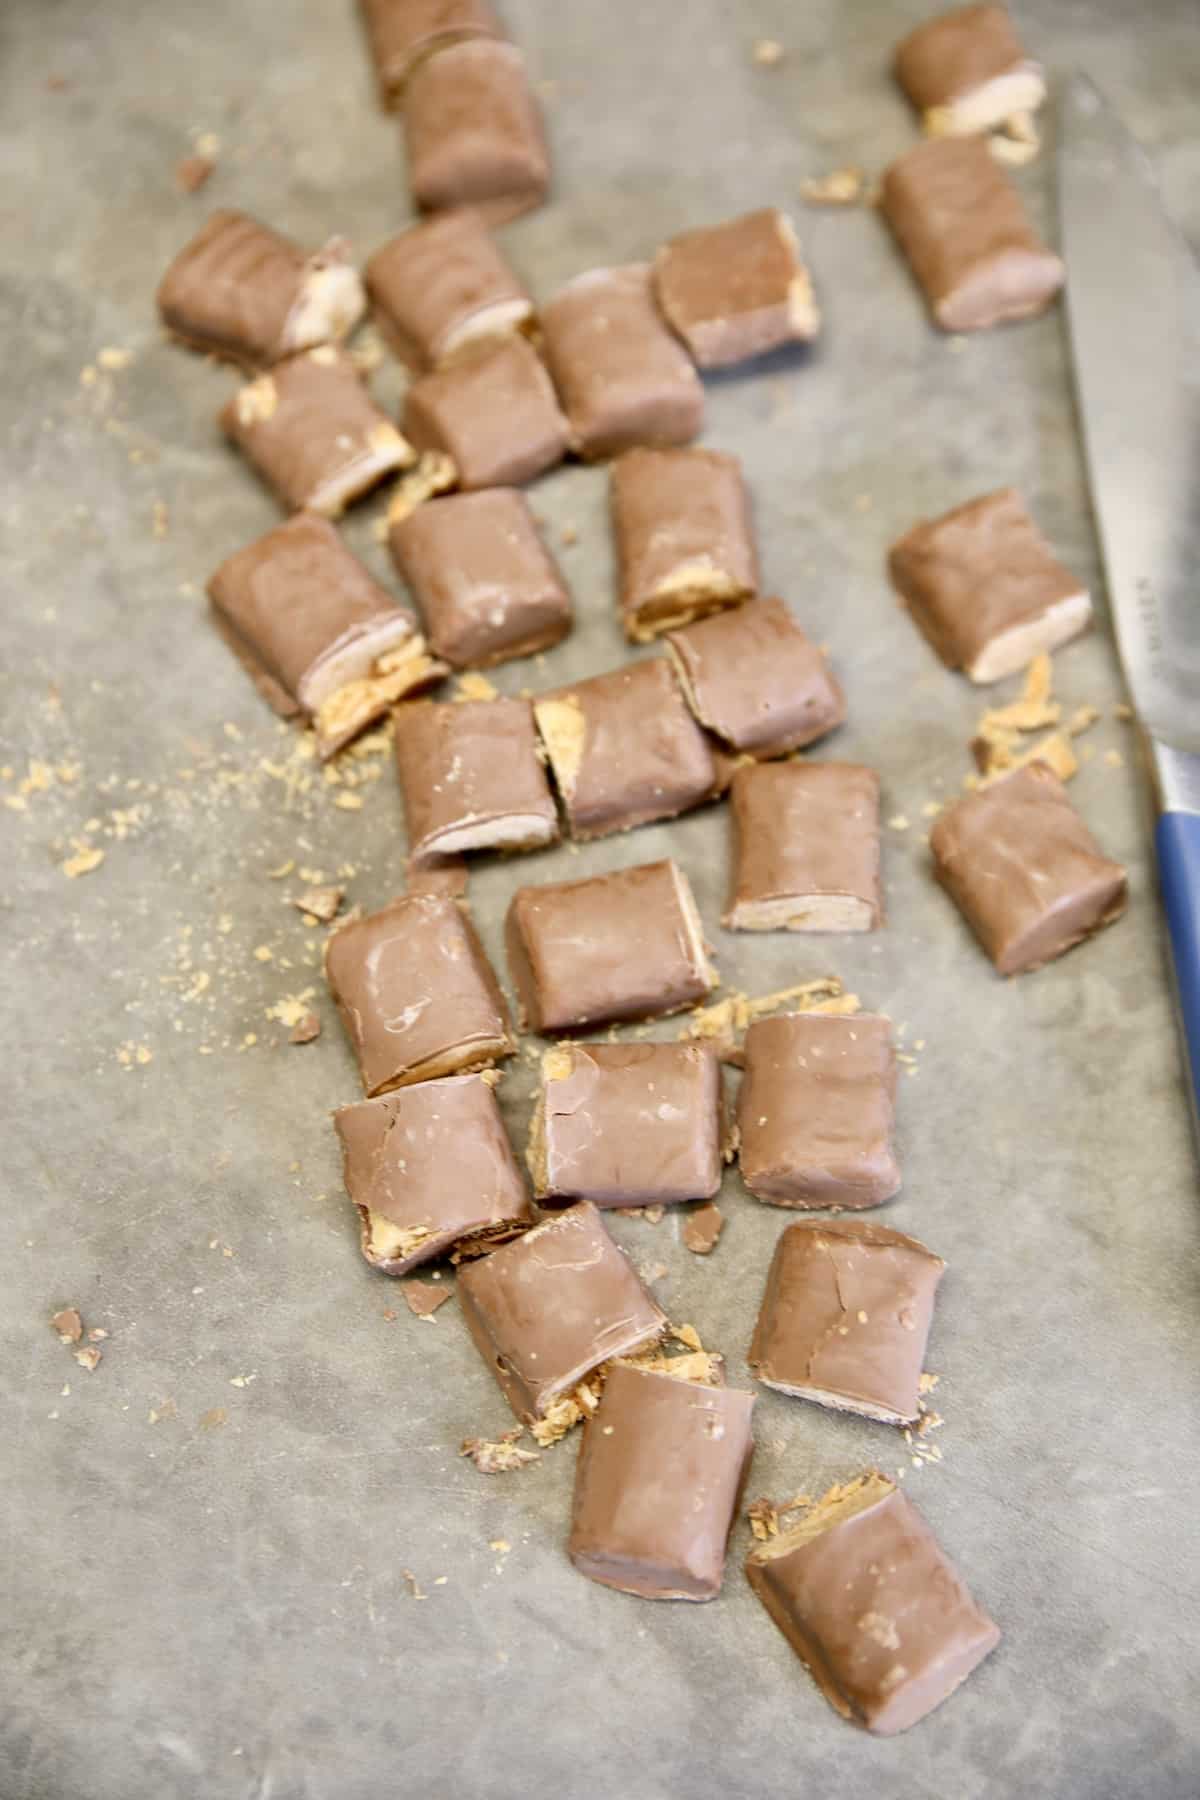 Chopped Butterfinger fun size candy bars.